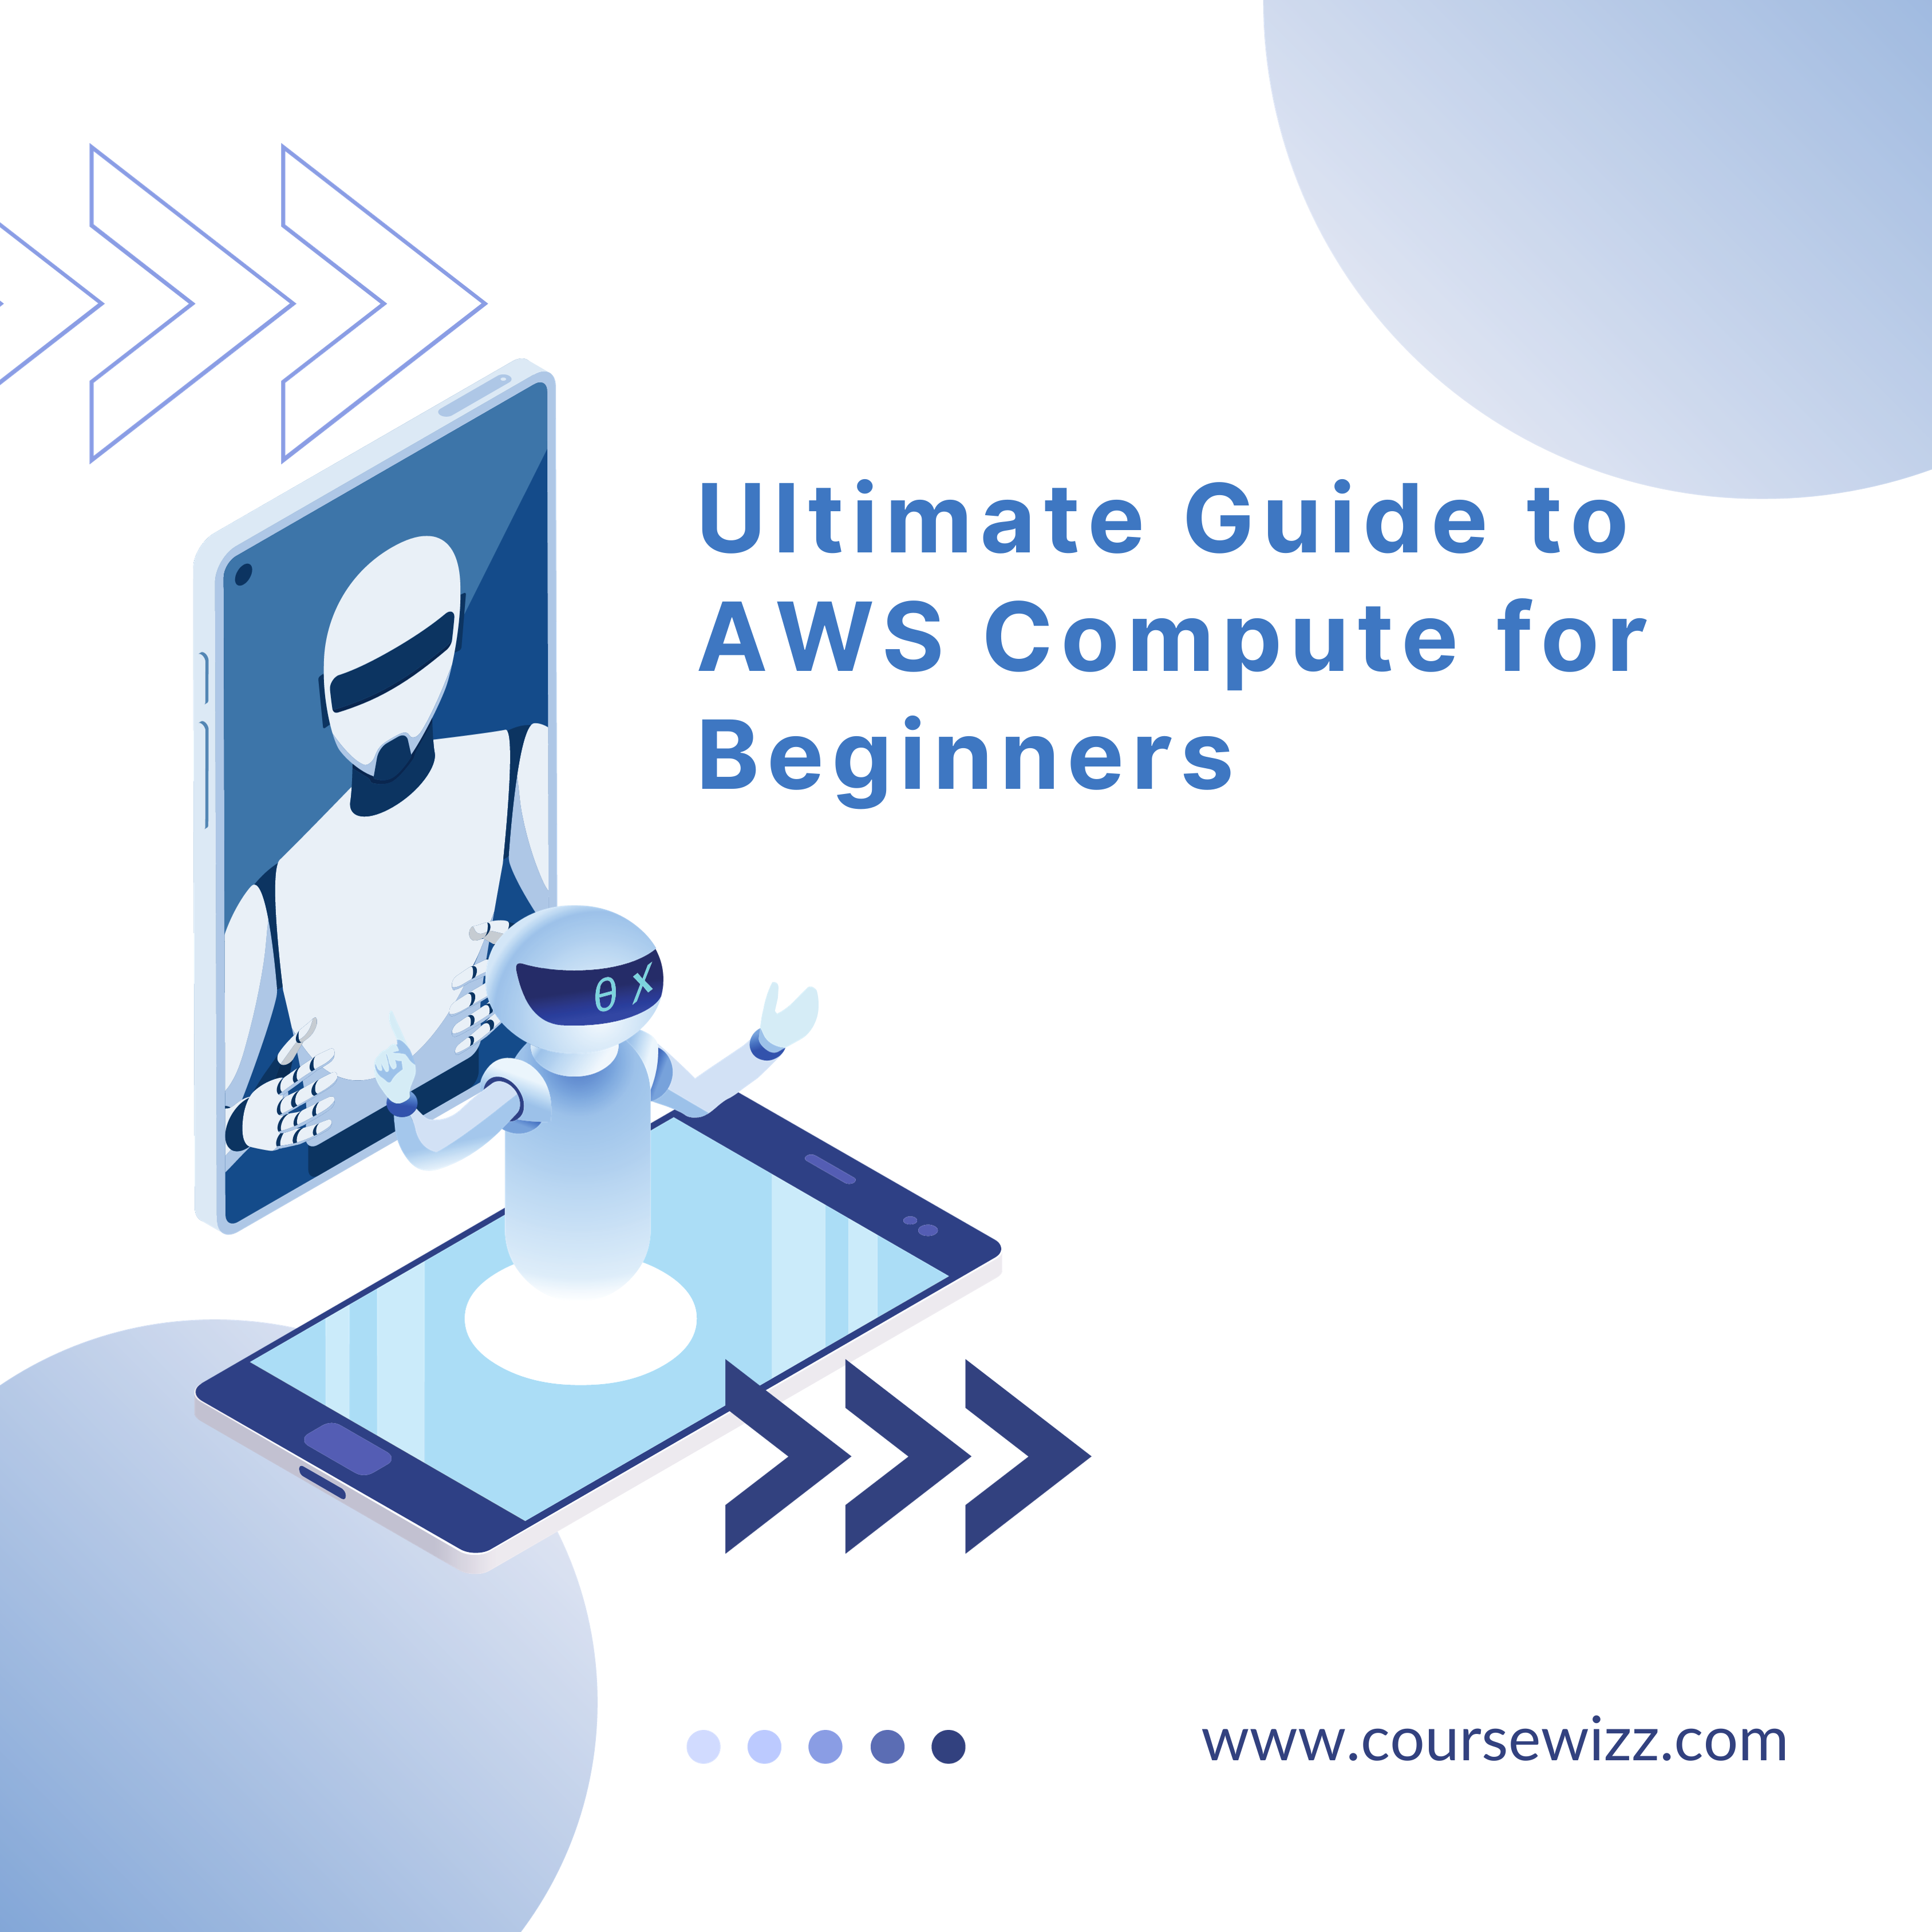 Ultimate Guide to AWS Compute for Beginners